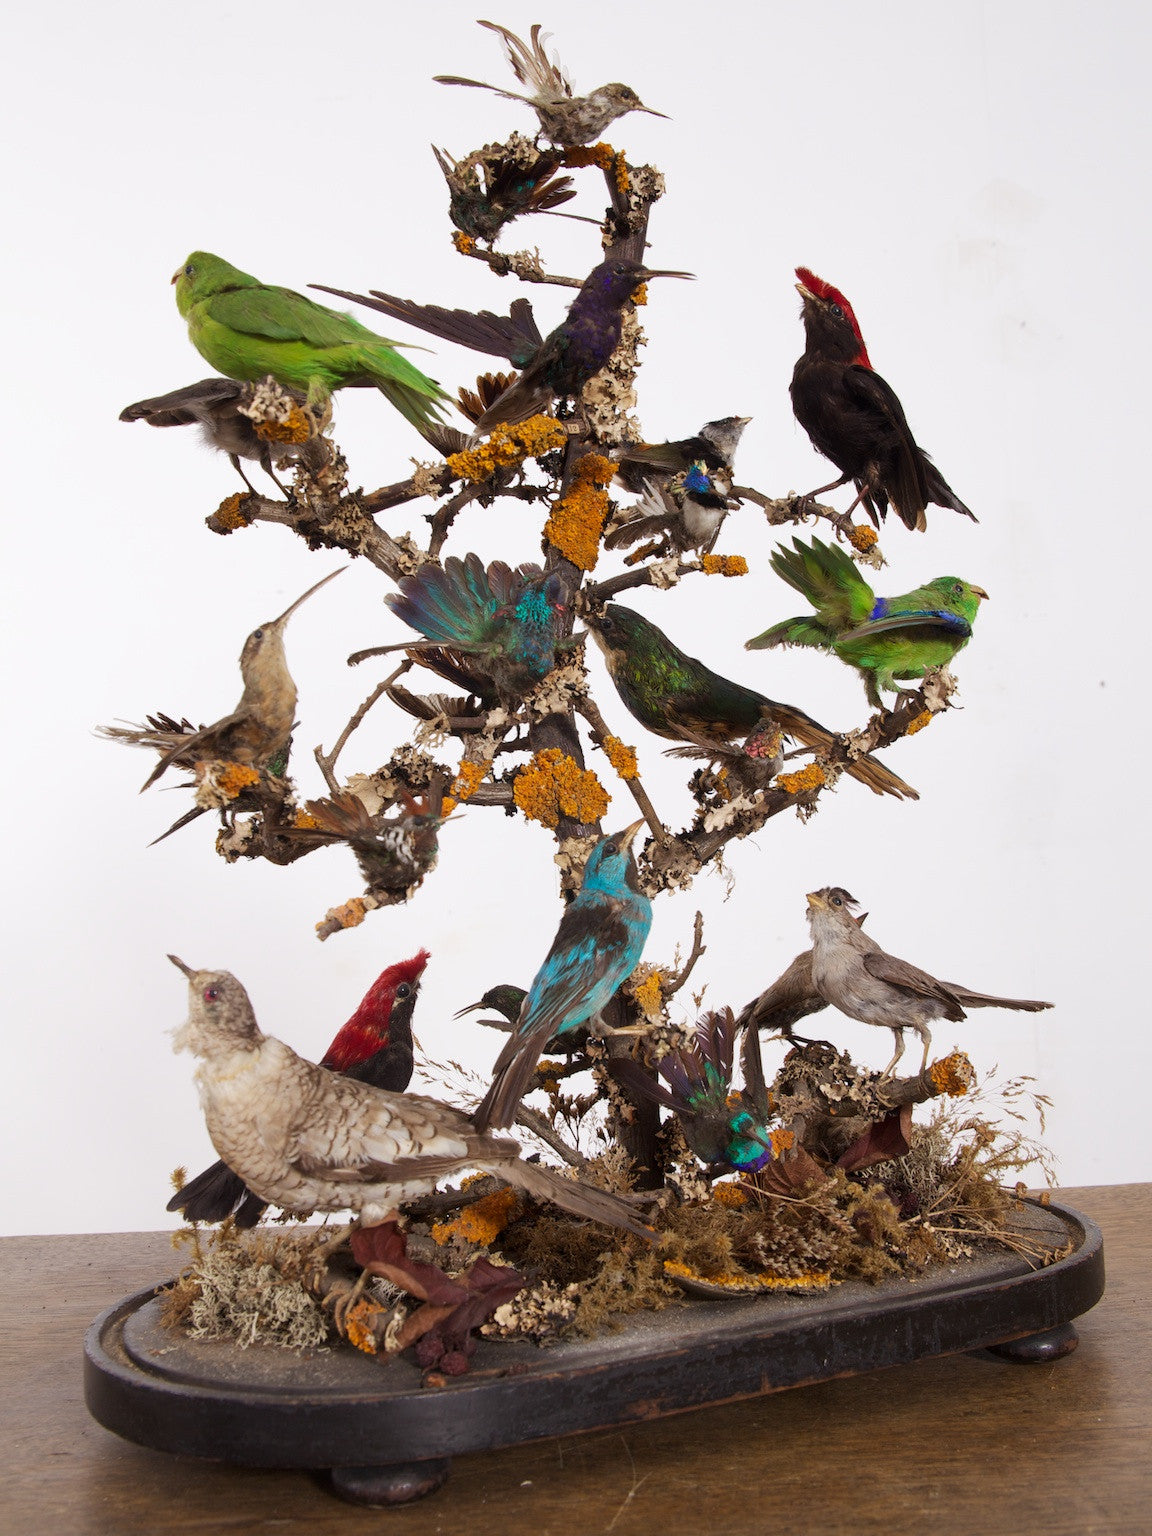 Victorian Bird Display - Artefacts of Prince Edward Island Community Museums